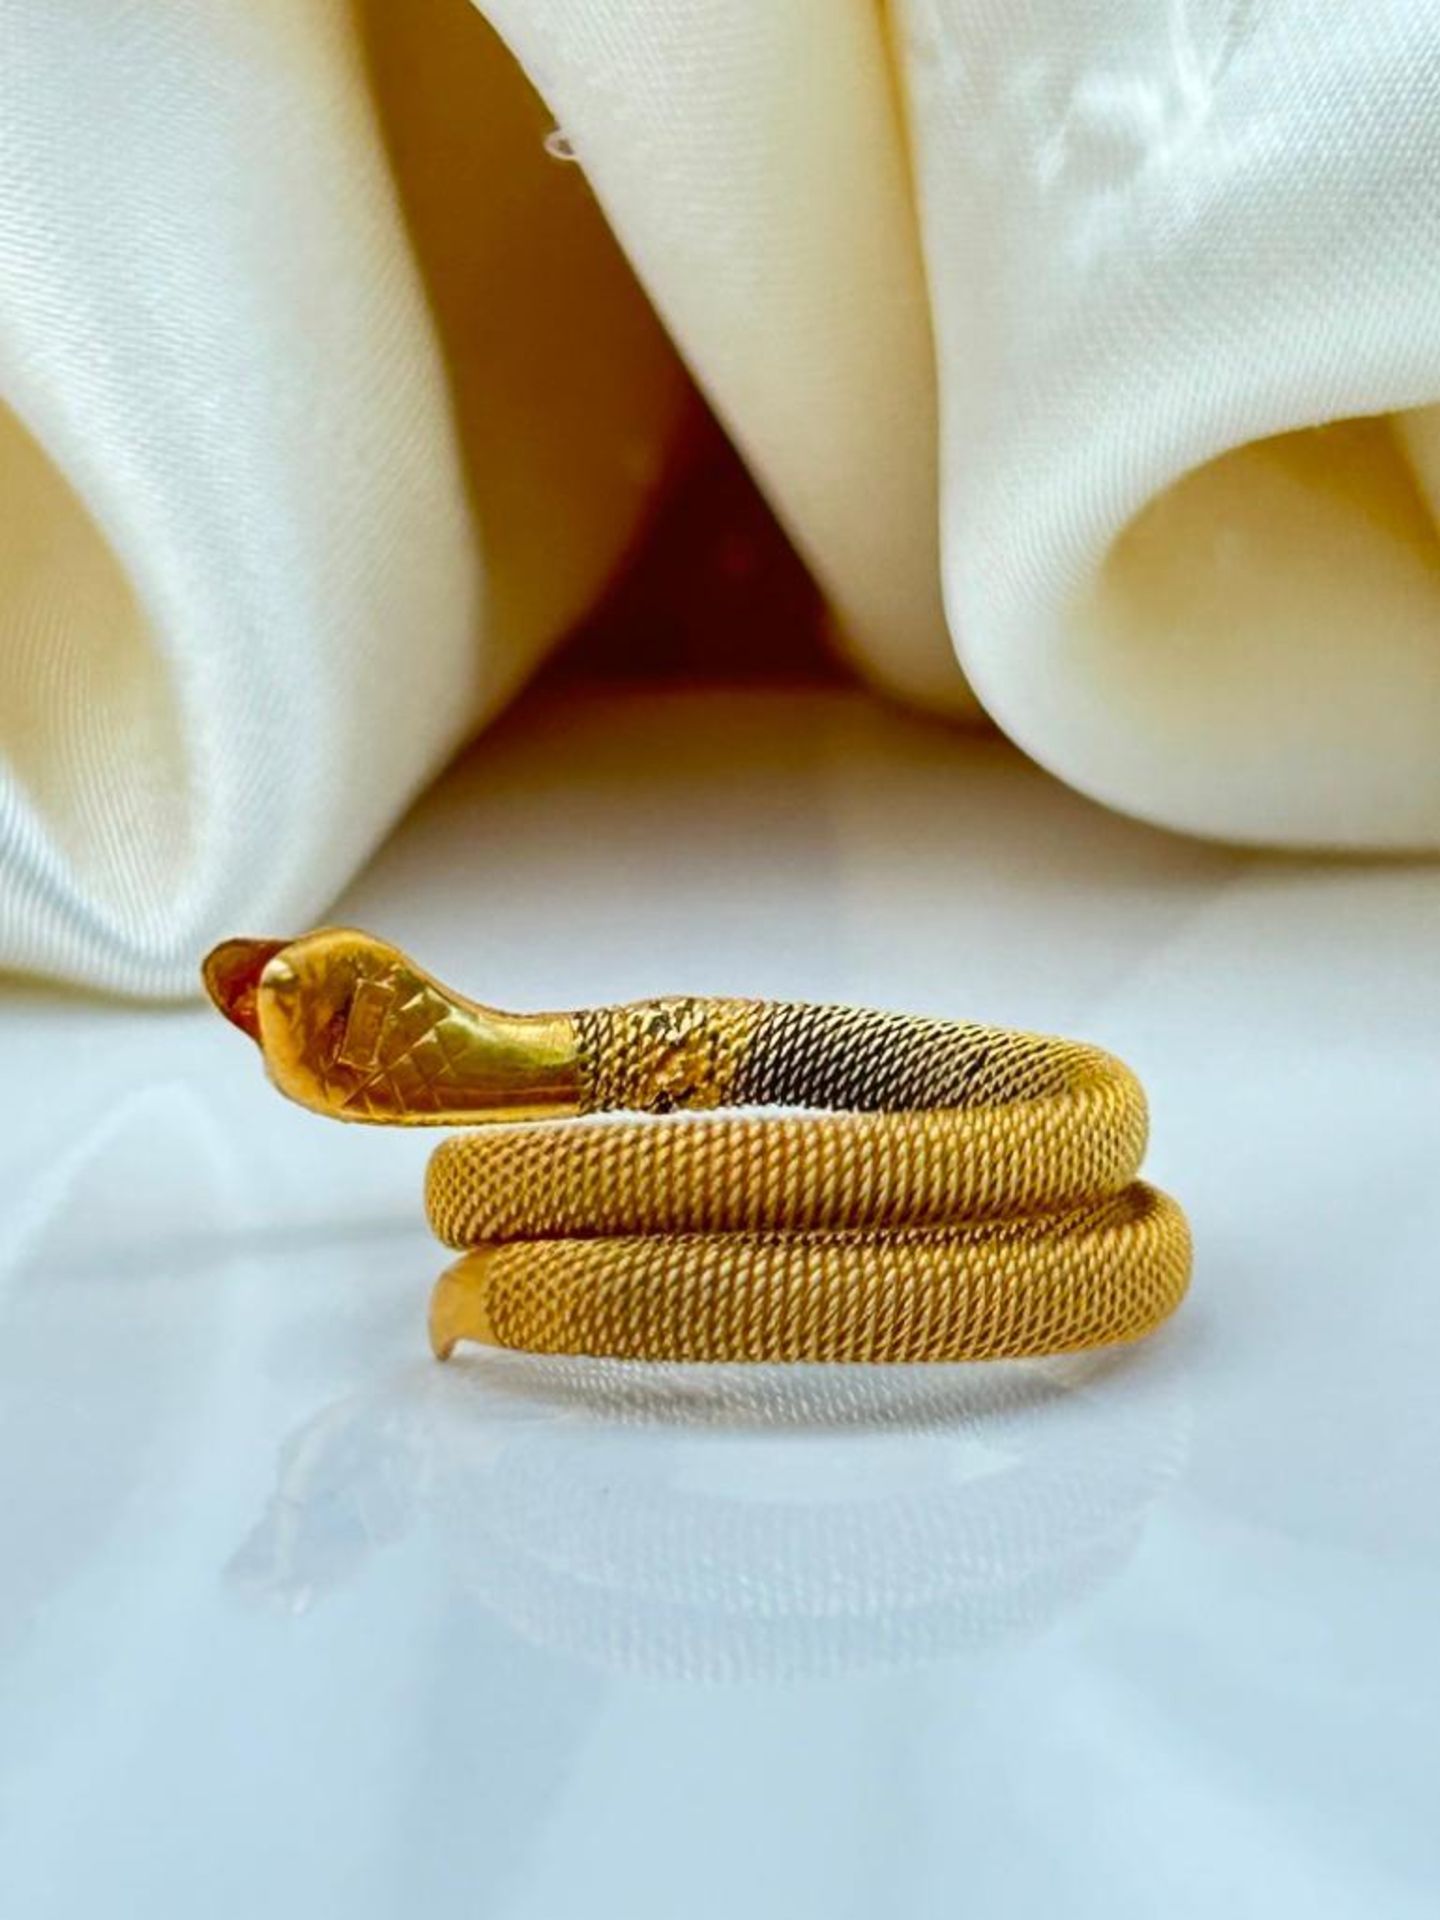 Antique Gold Coiled Snake Ring - Image 7 of 7